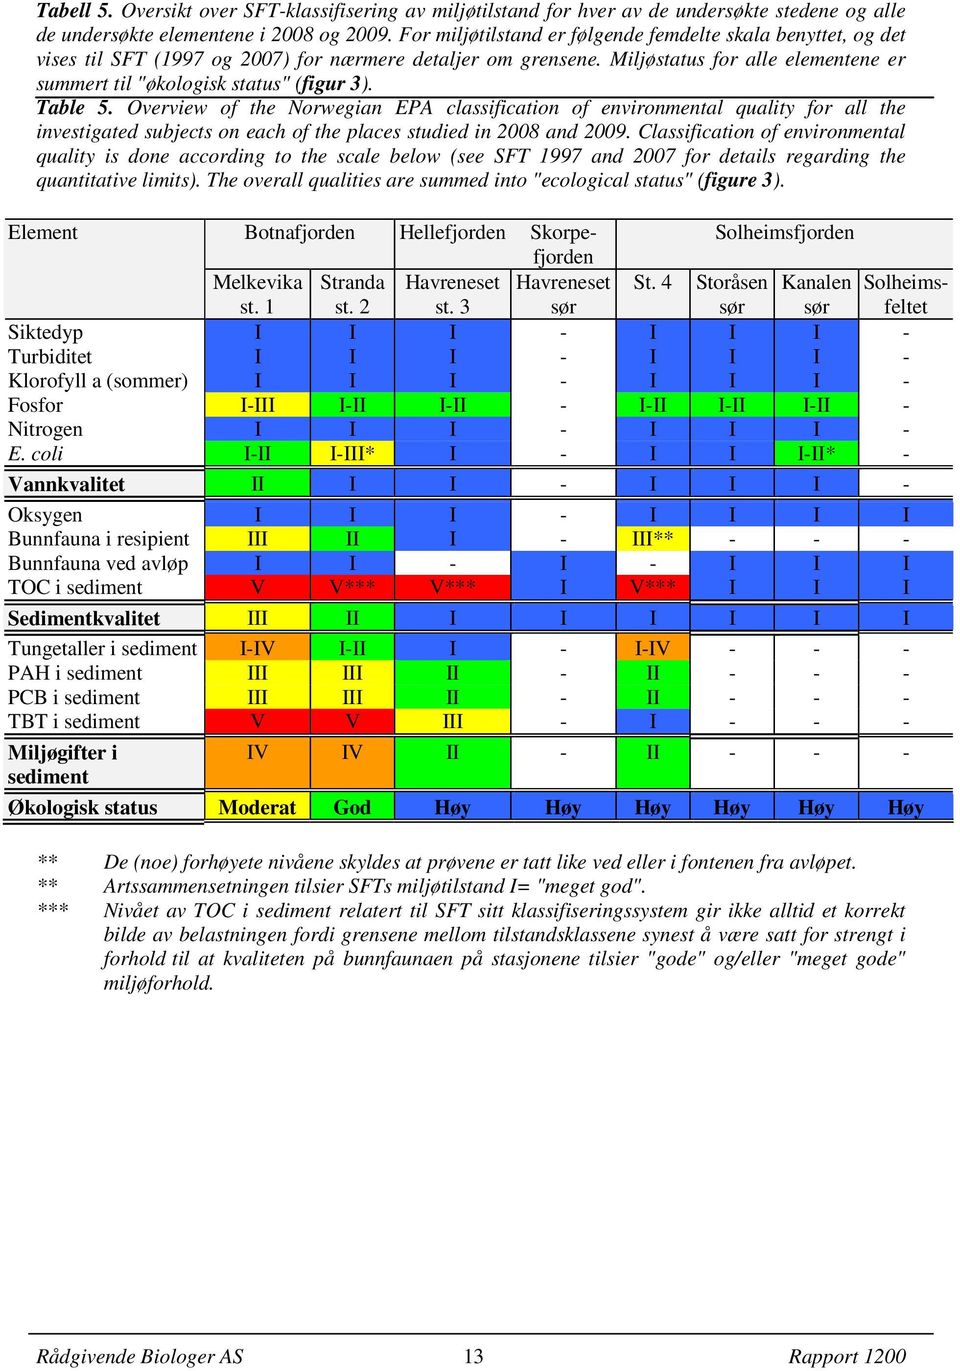 Table 5. Overview of the Norwegian EPA classification of environmental quality for all the investigated subjects on each of the places studied in 28 and 29.